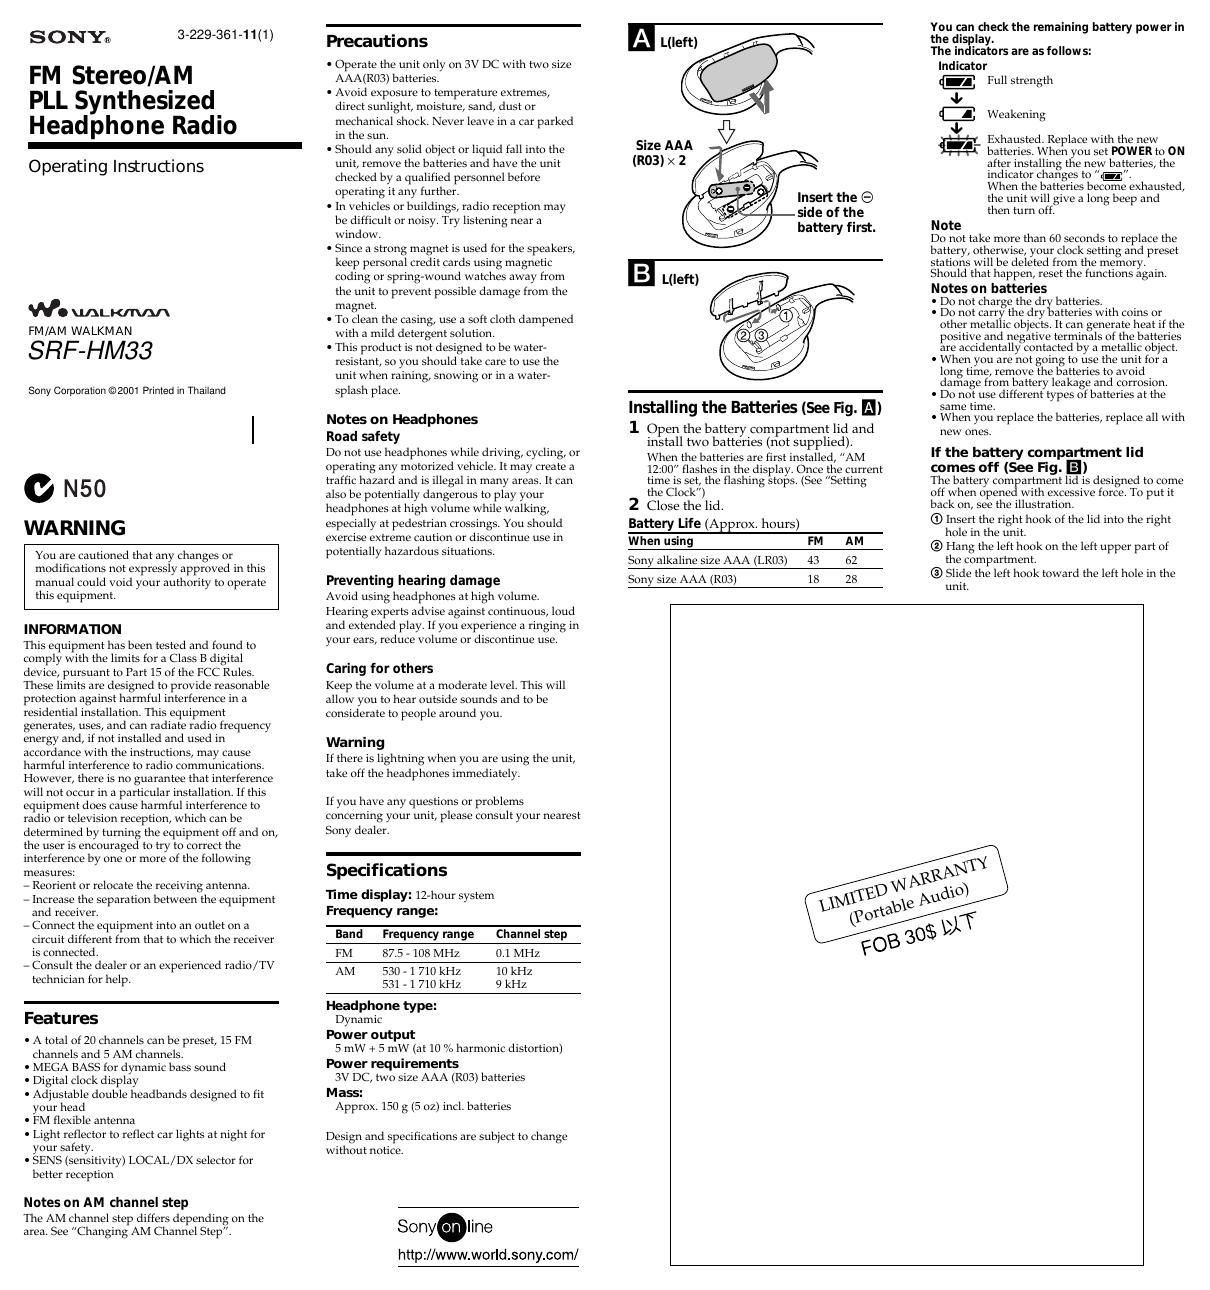 sony srf hm 33 owners manual